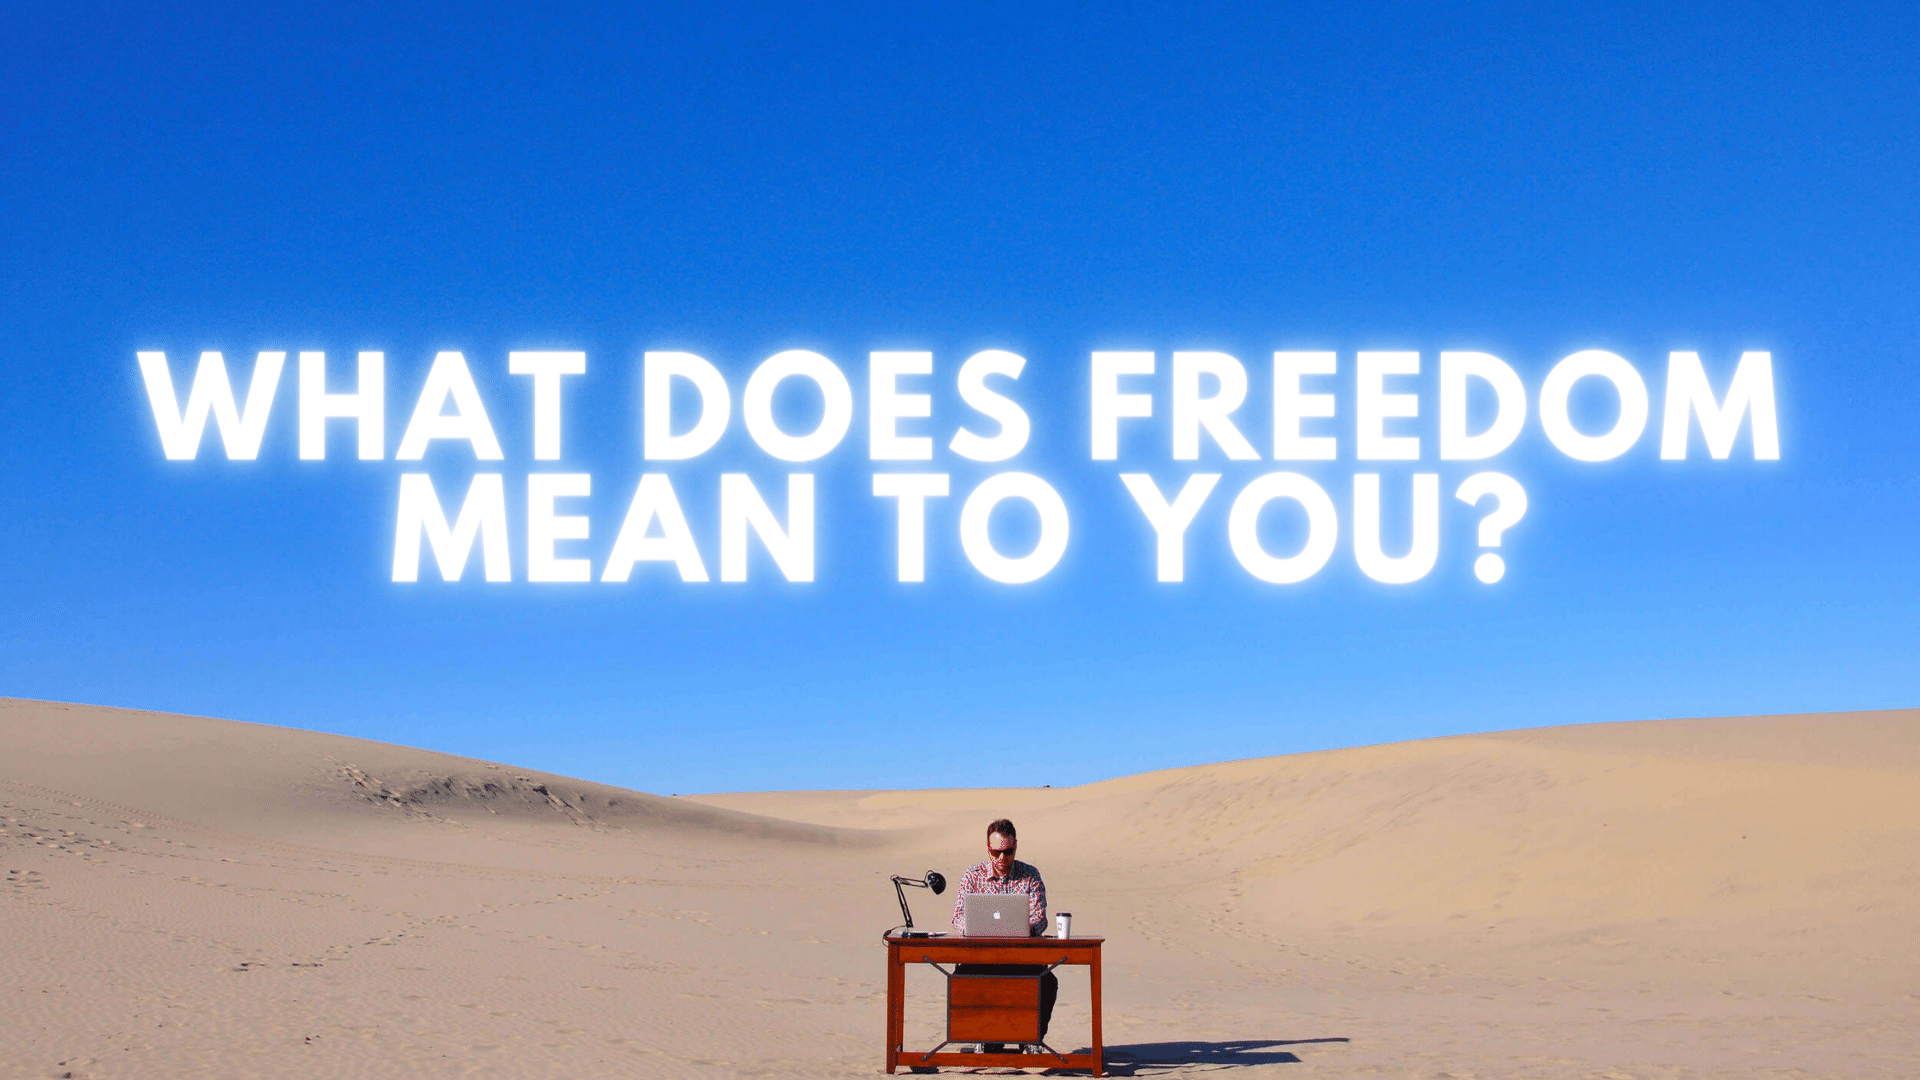 What Does Freedom Mean to You?